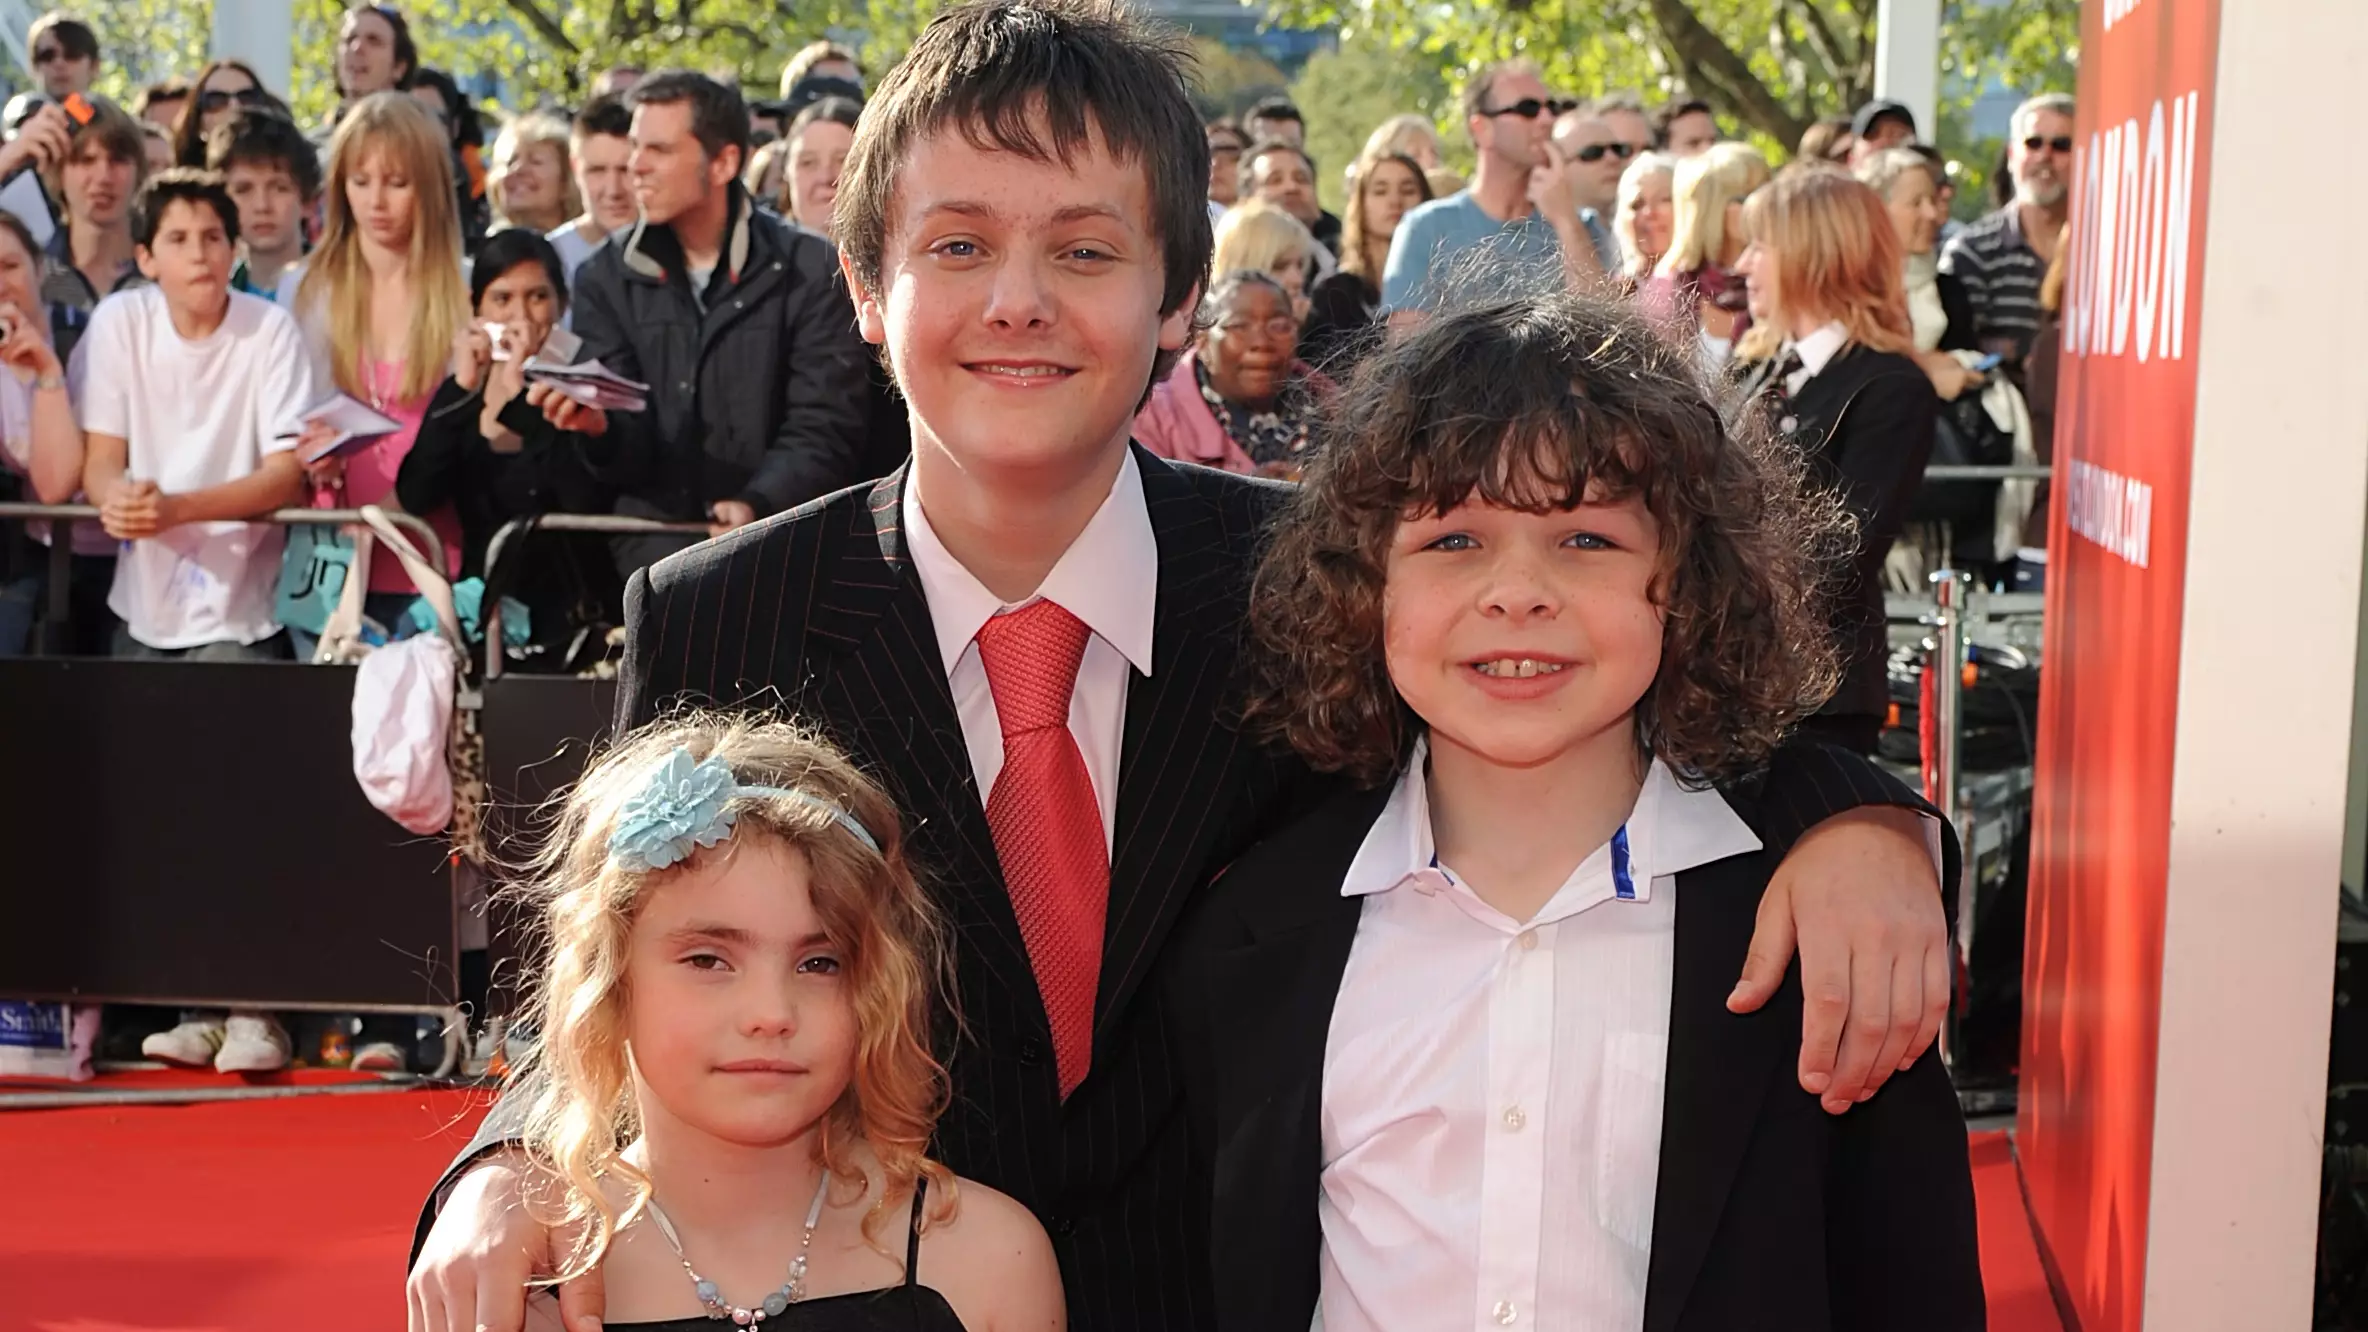 Karen From 'Outnumbered' Just Shared Reunion Picture Of The Cast